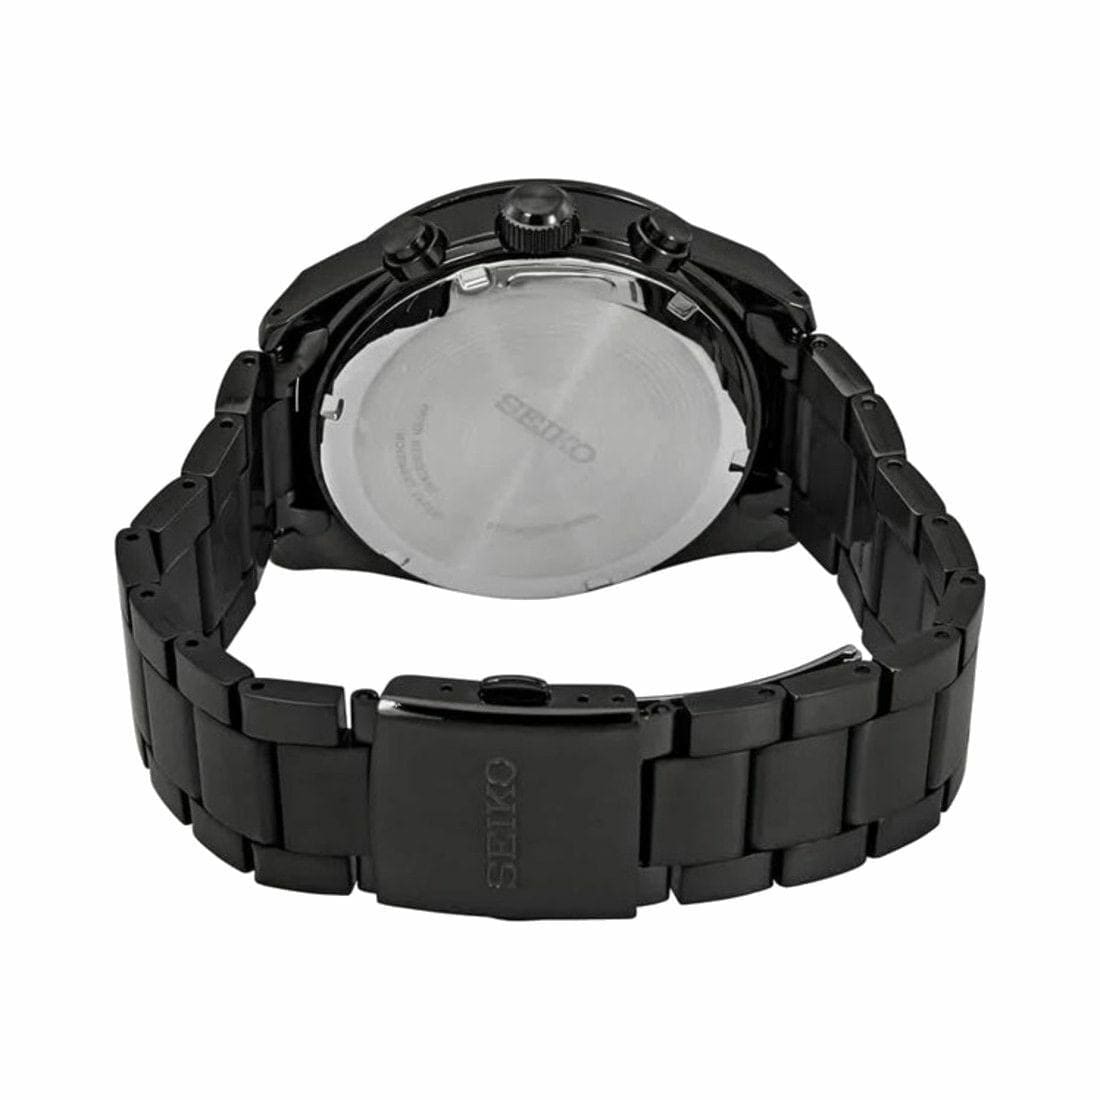 Seiko SSC721 Solar Ion-Plated Stainless Steel Black Dial Men's Chronograph Watch 029665196491